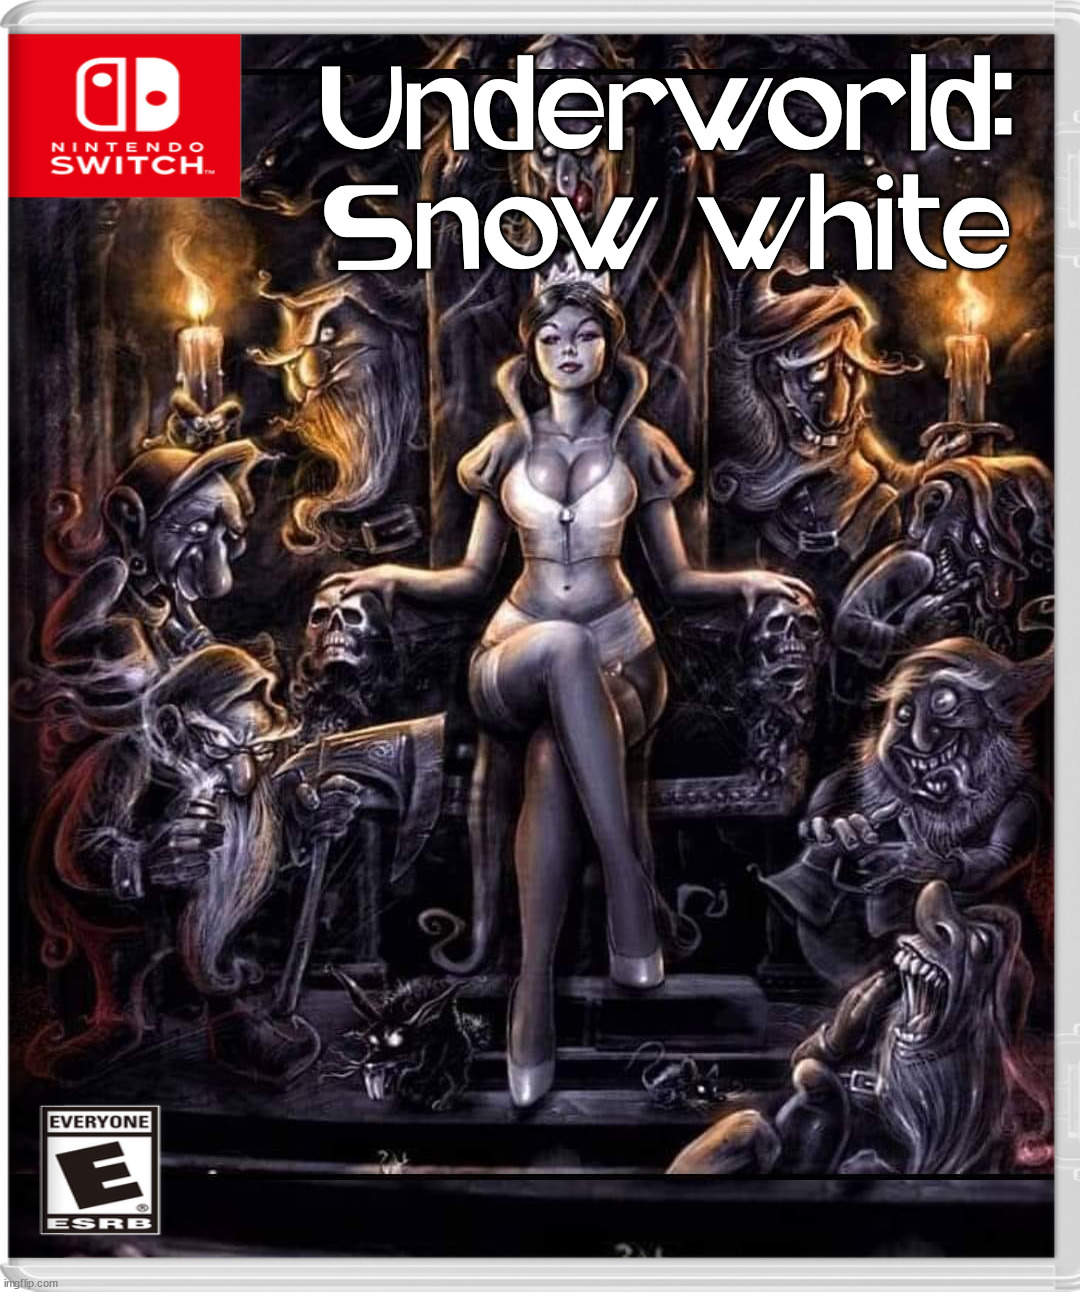 Underworld:
Snow white | image tagged in nintendo switch | made w/ Imgflip meme maker